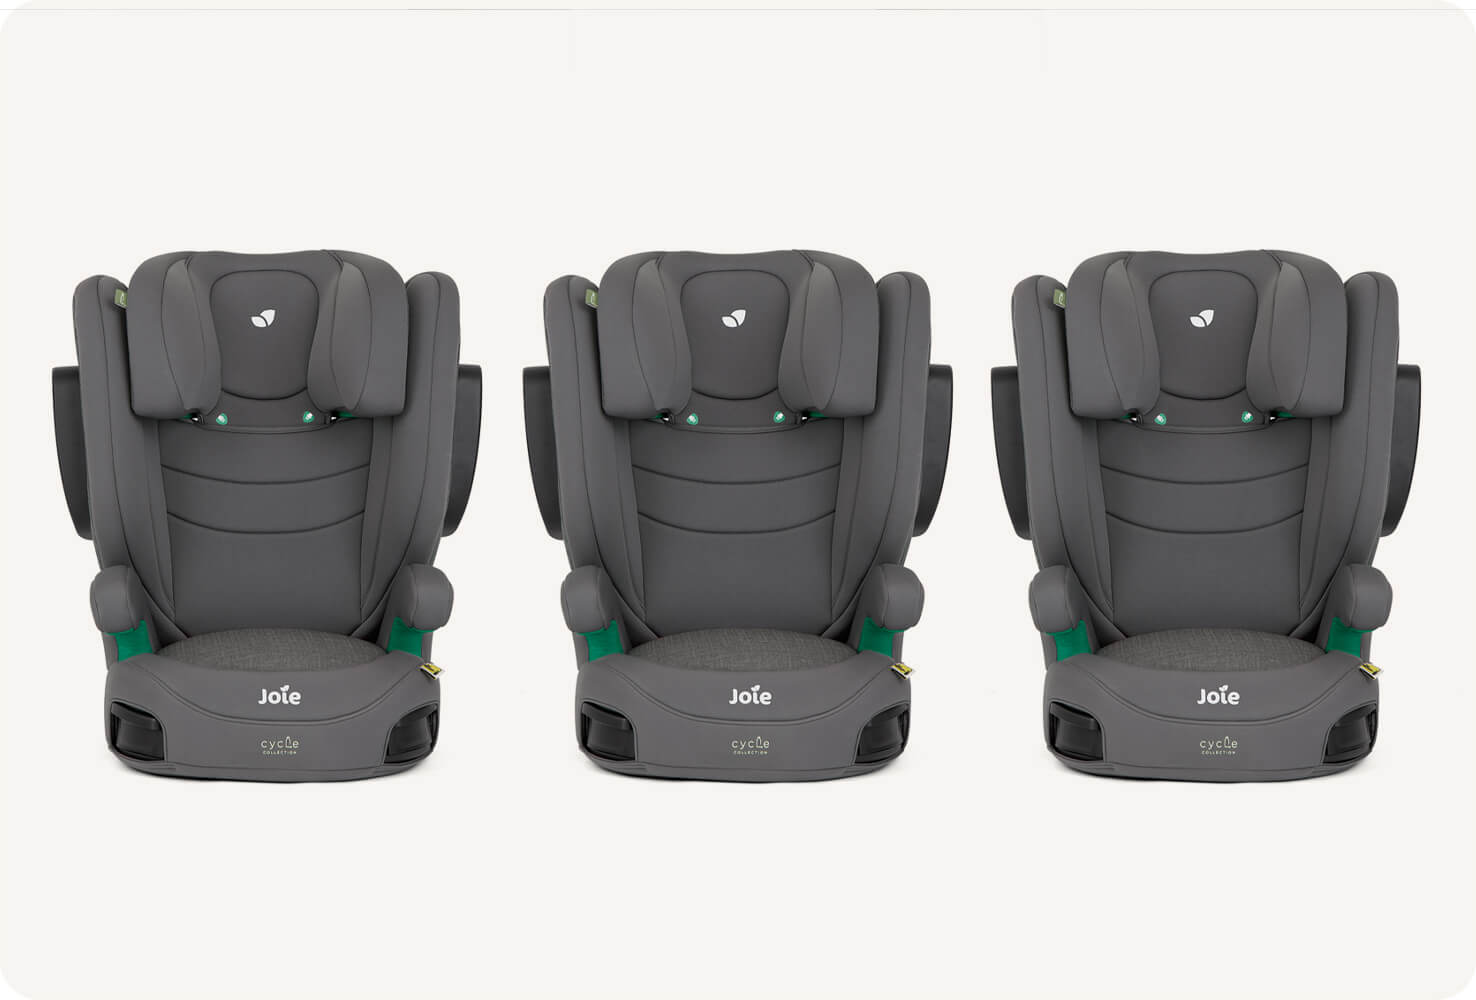   3 gray I-Trillo booster seats side by side, facing toward the right at an angle.